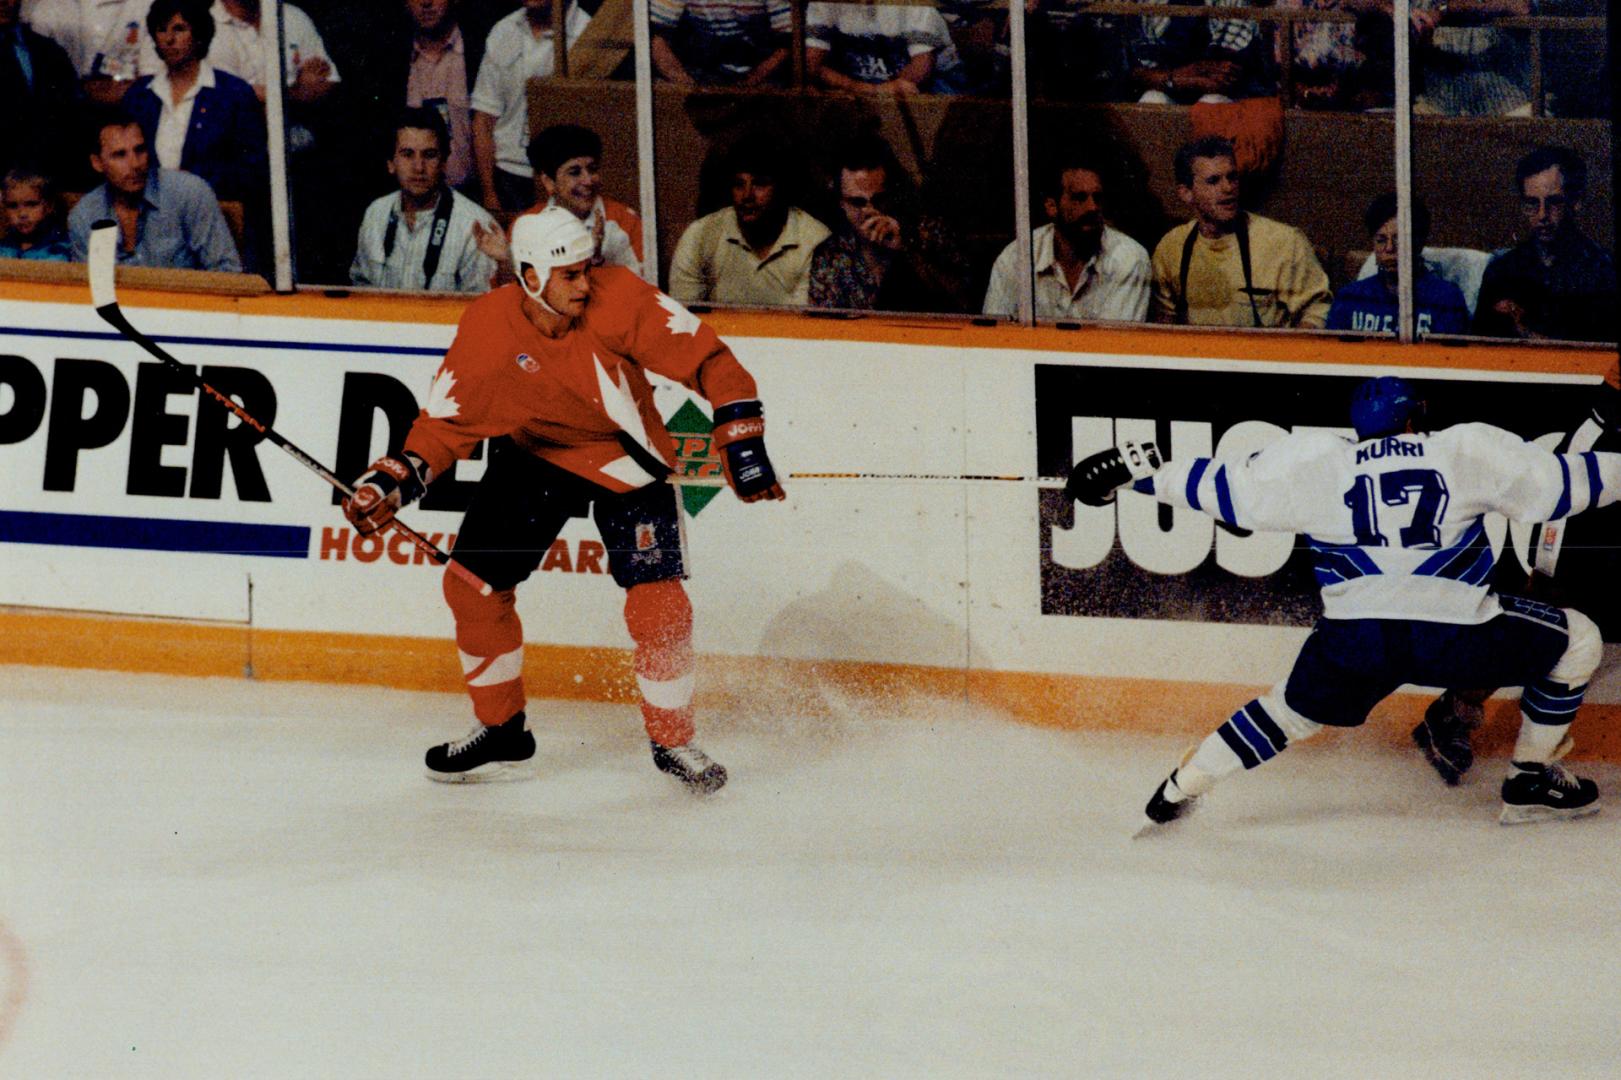 Keeping touch: Team Canada's Eric Lindros keeps Finnish sniper Jari Kurri tied up in first period last night at Gardens.